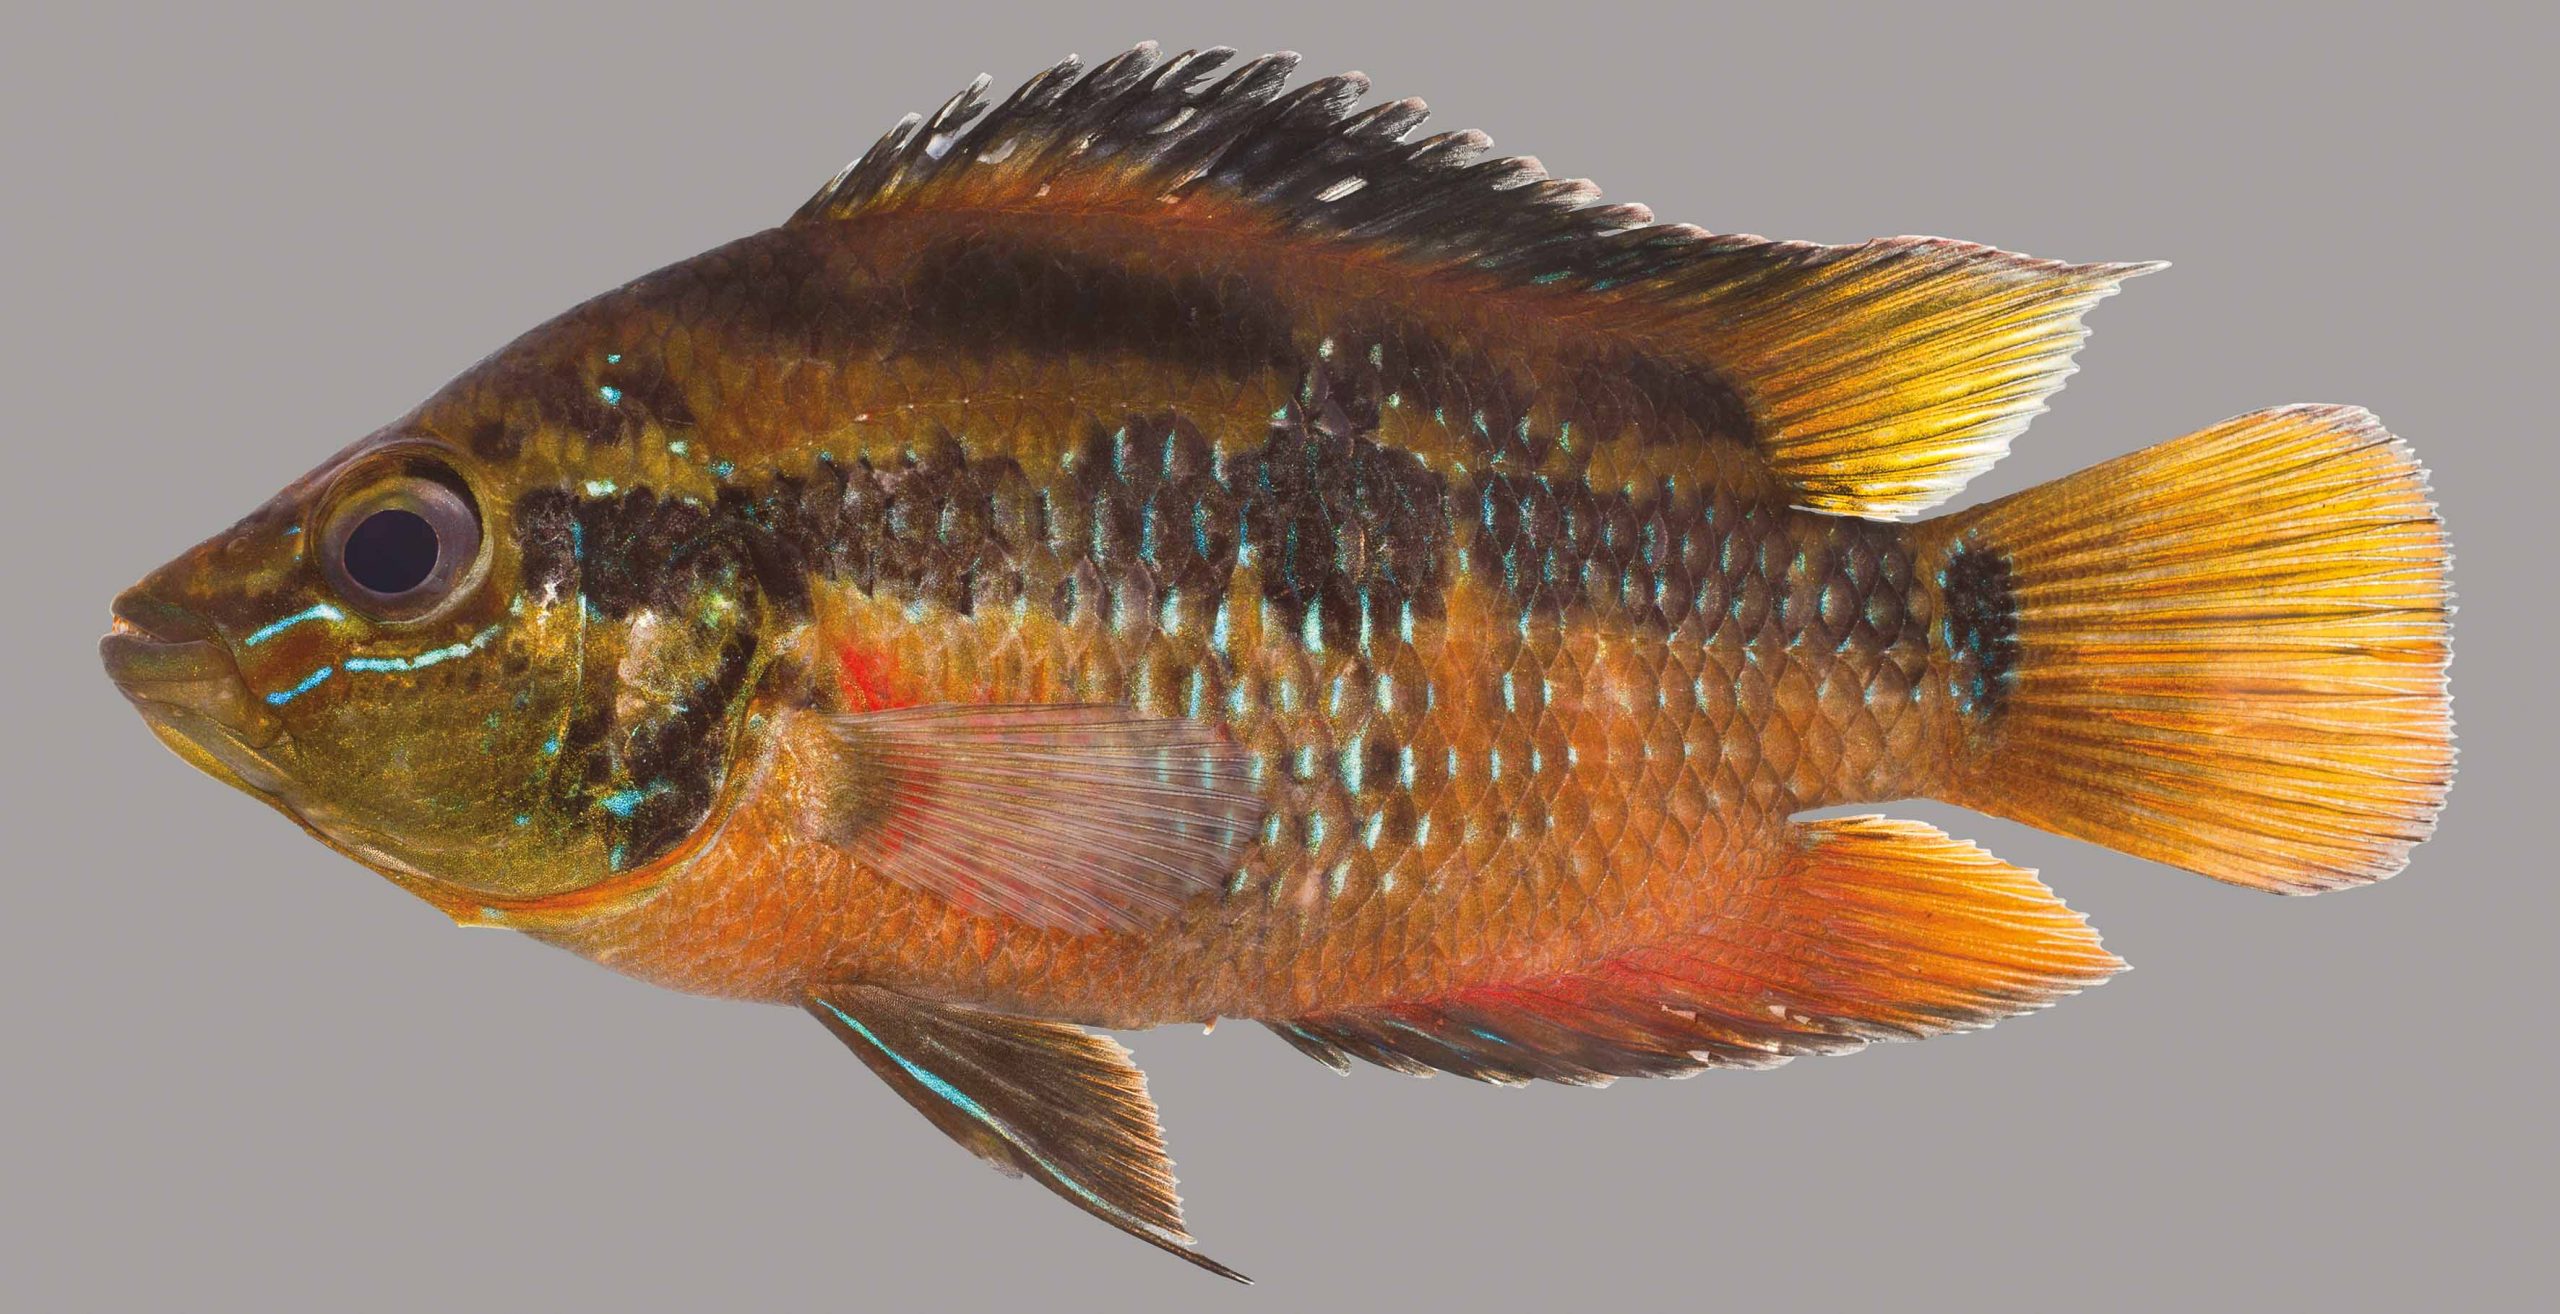 Lateral view of a yellowbelly cichlid